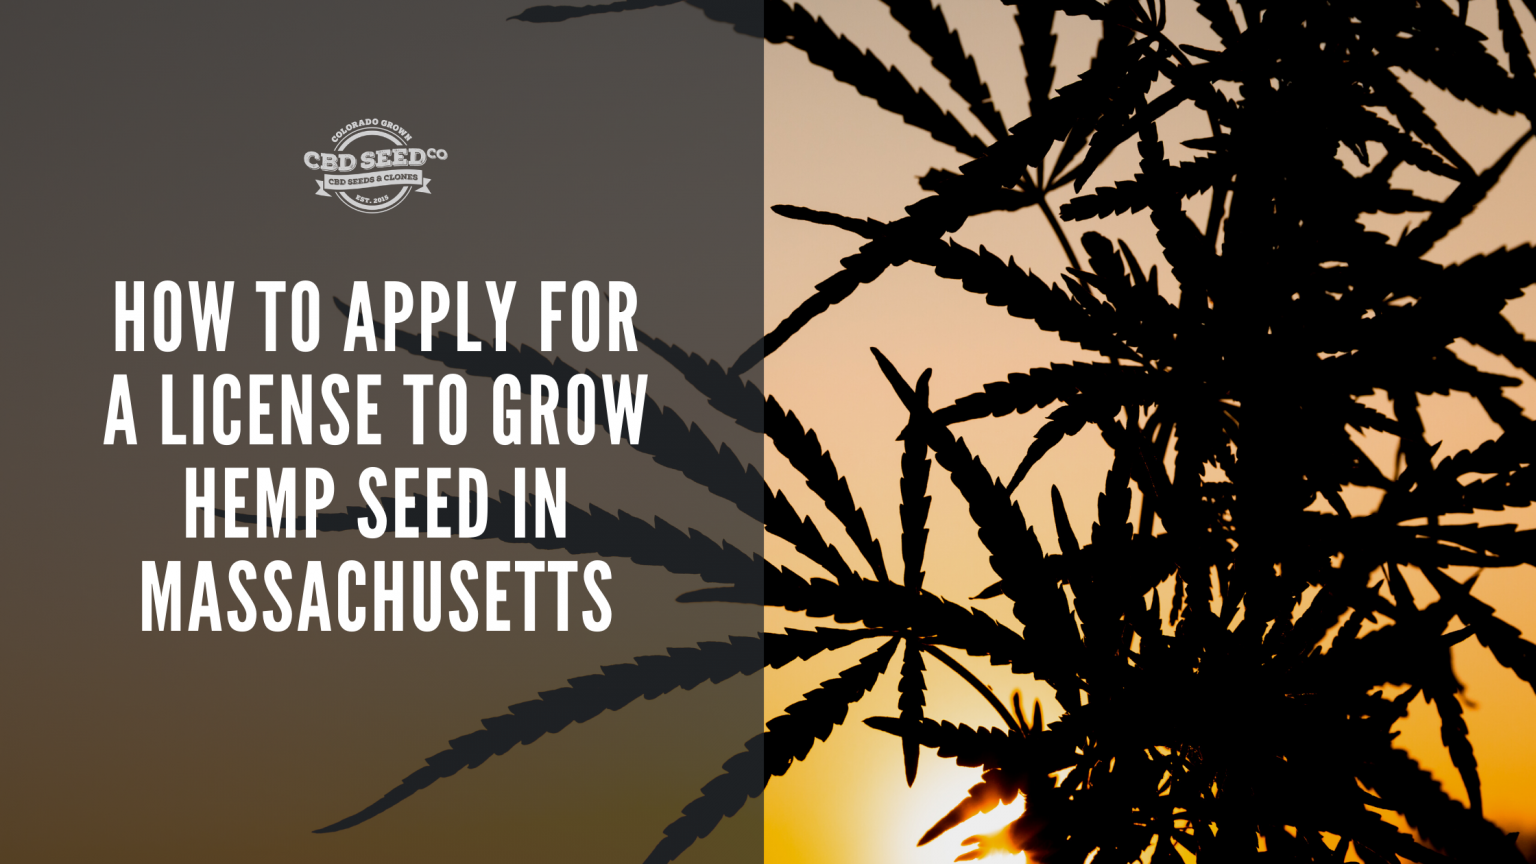 How to Apply for a License to Grow Hemp Seed in Massachusetts - CBD Seed Co.